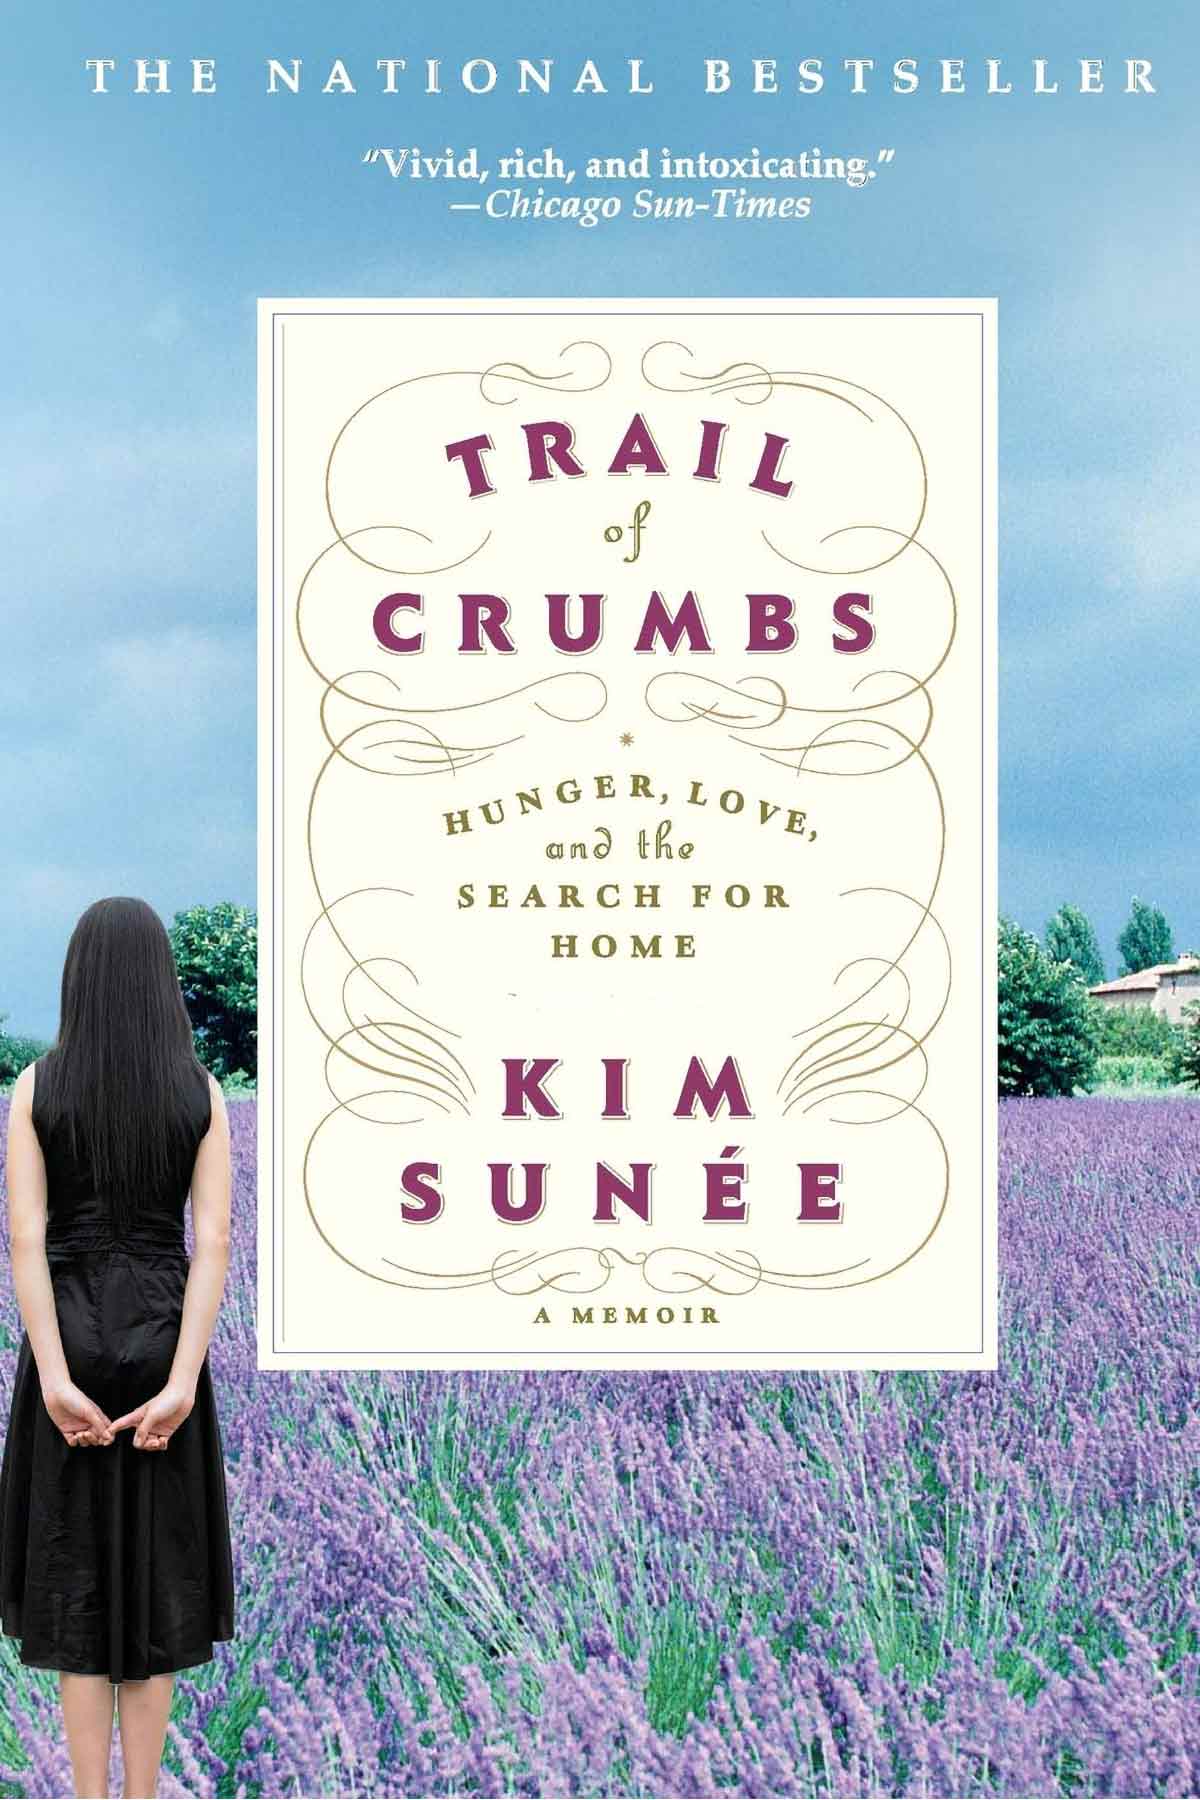 The Trail of Crumbs book cover.